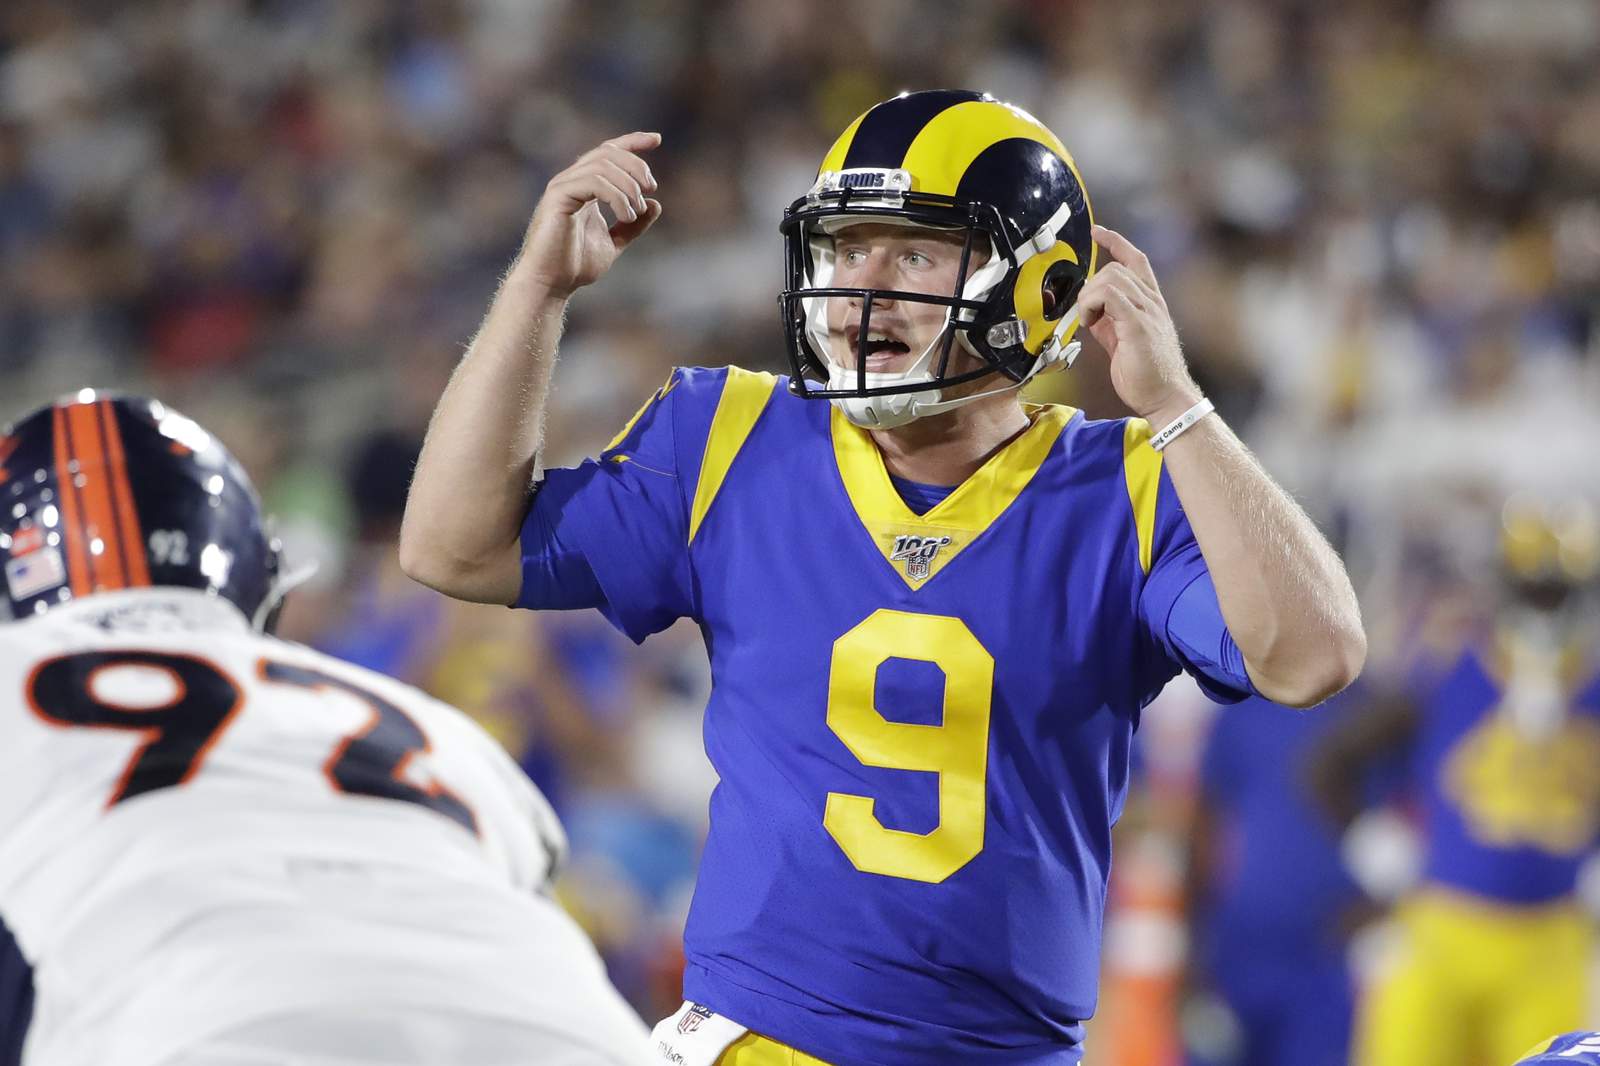 Cashing in: Rams QB Wolford to make high-profile NFL debut